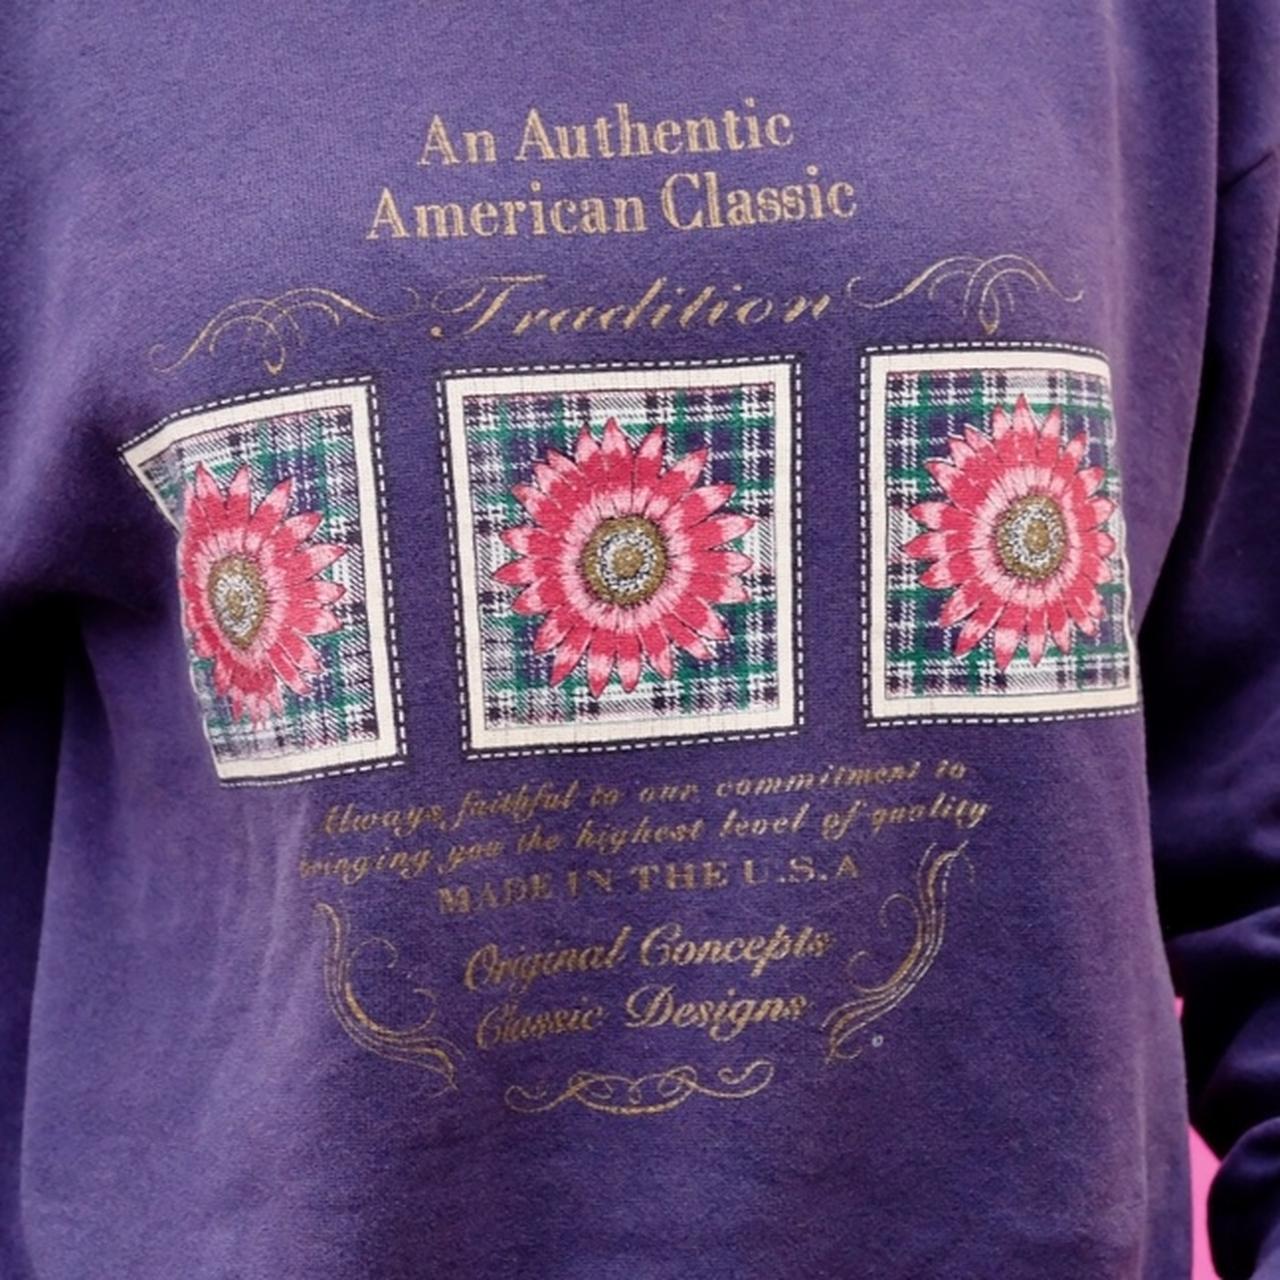 Product Image 2 - Vintage American Classic Crewneck

size: Fits